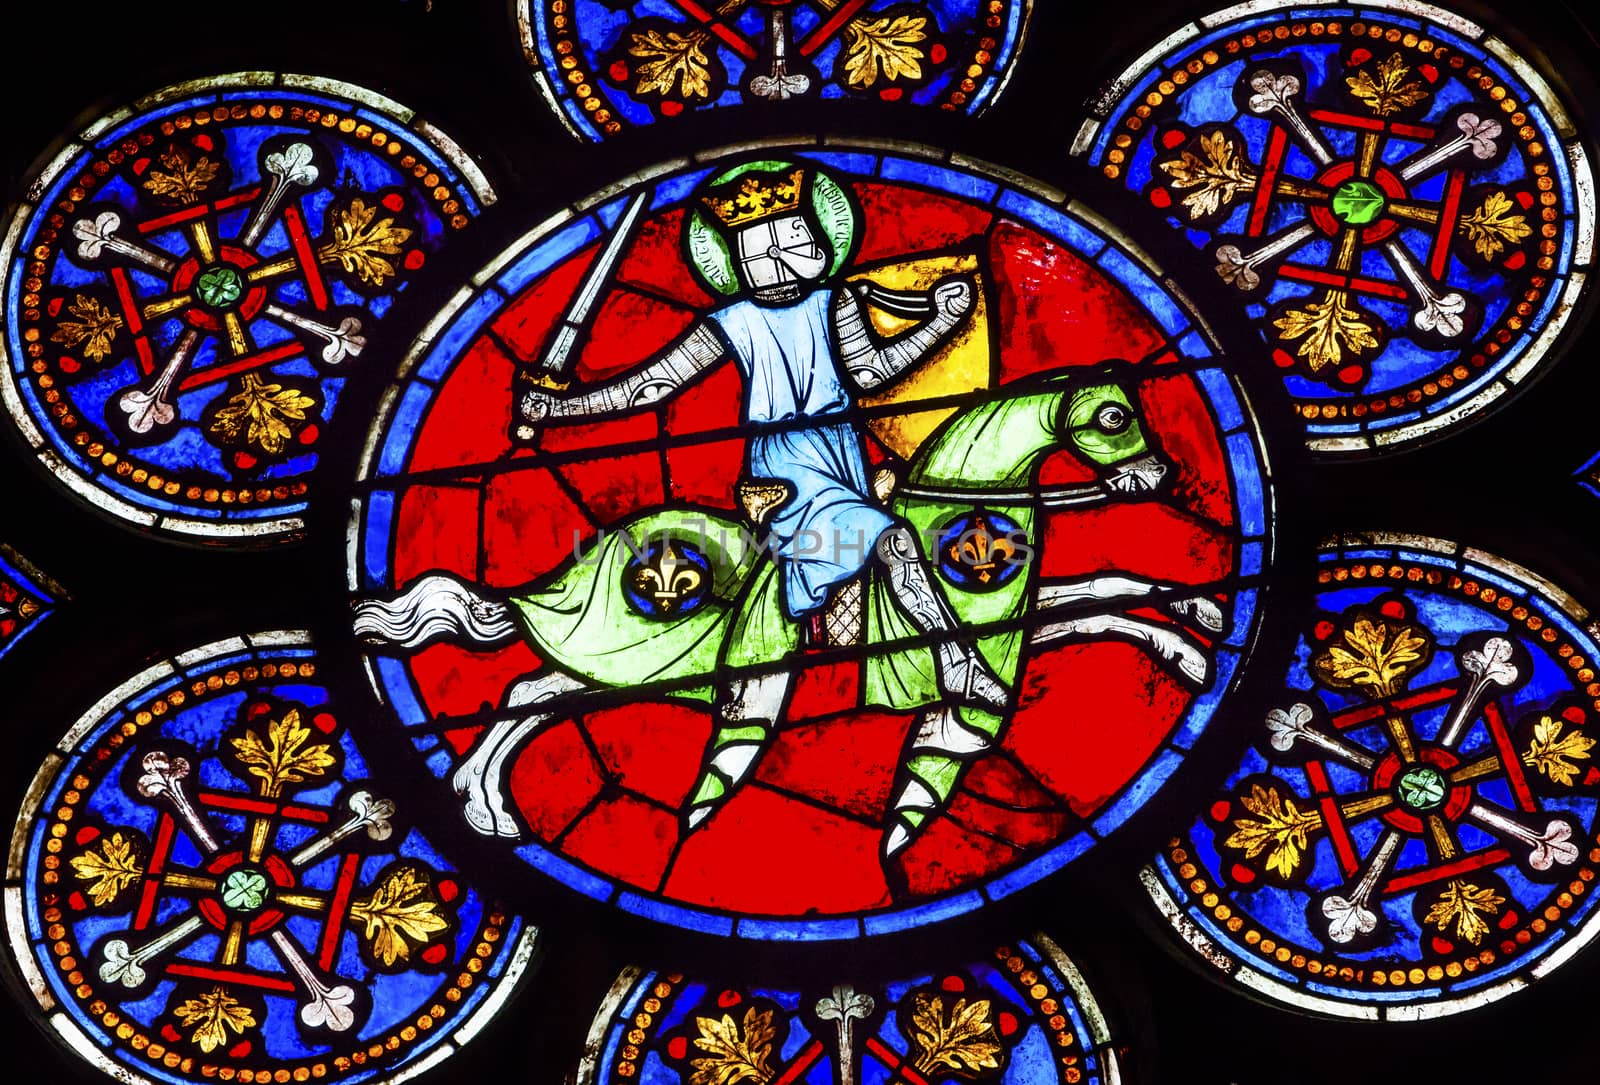 Armed Knight Sword Stained Glass Notre Dame Cathedral Paris France.  Notre Dame was built between 1163 and 1250AD.  